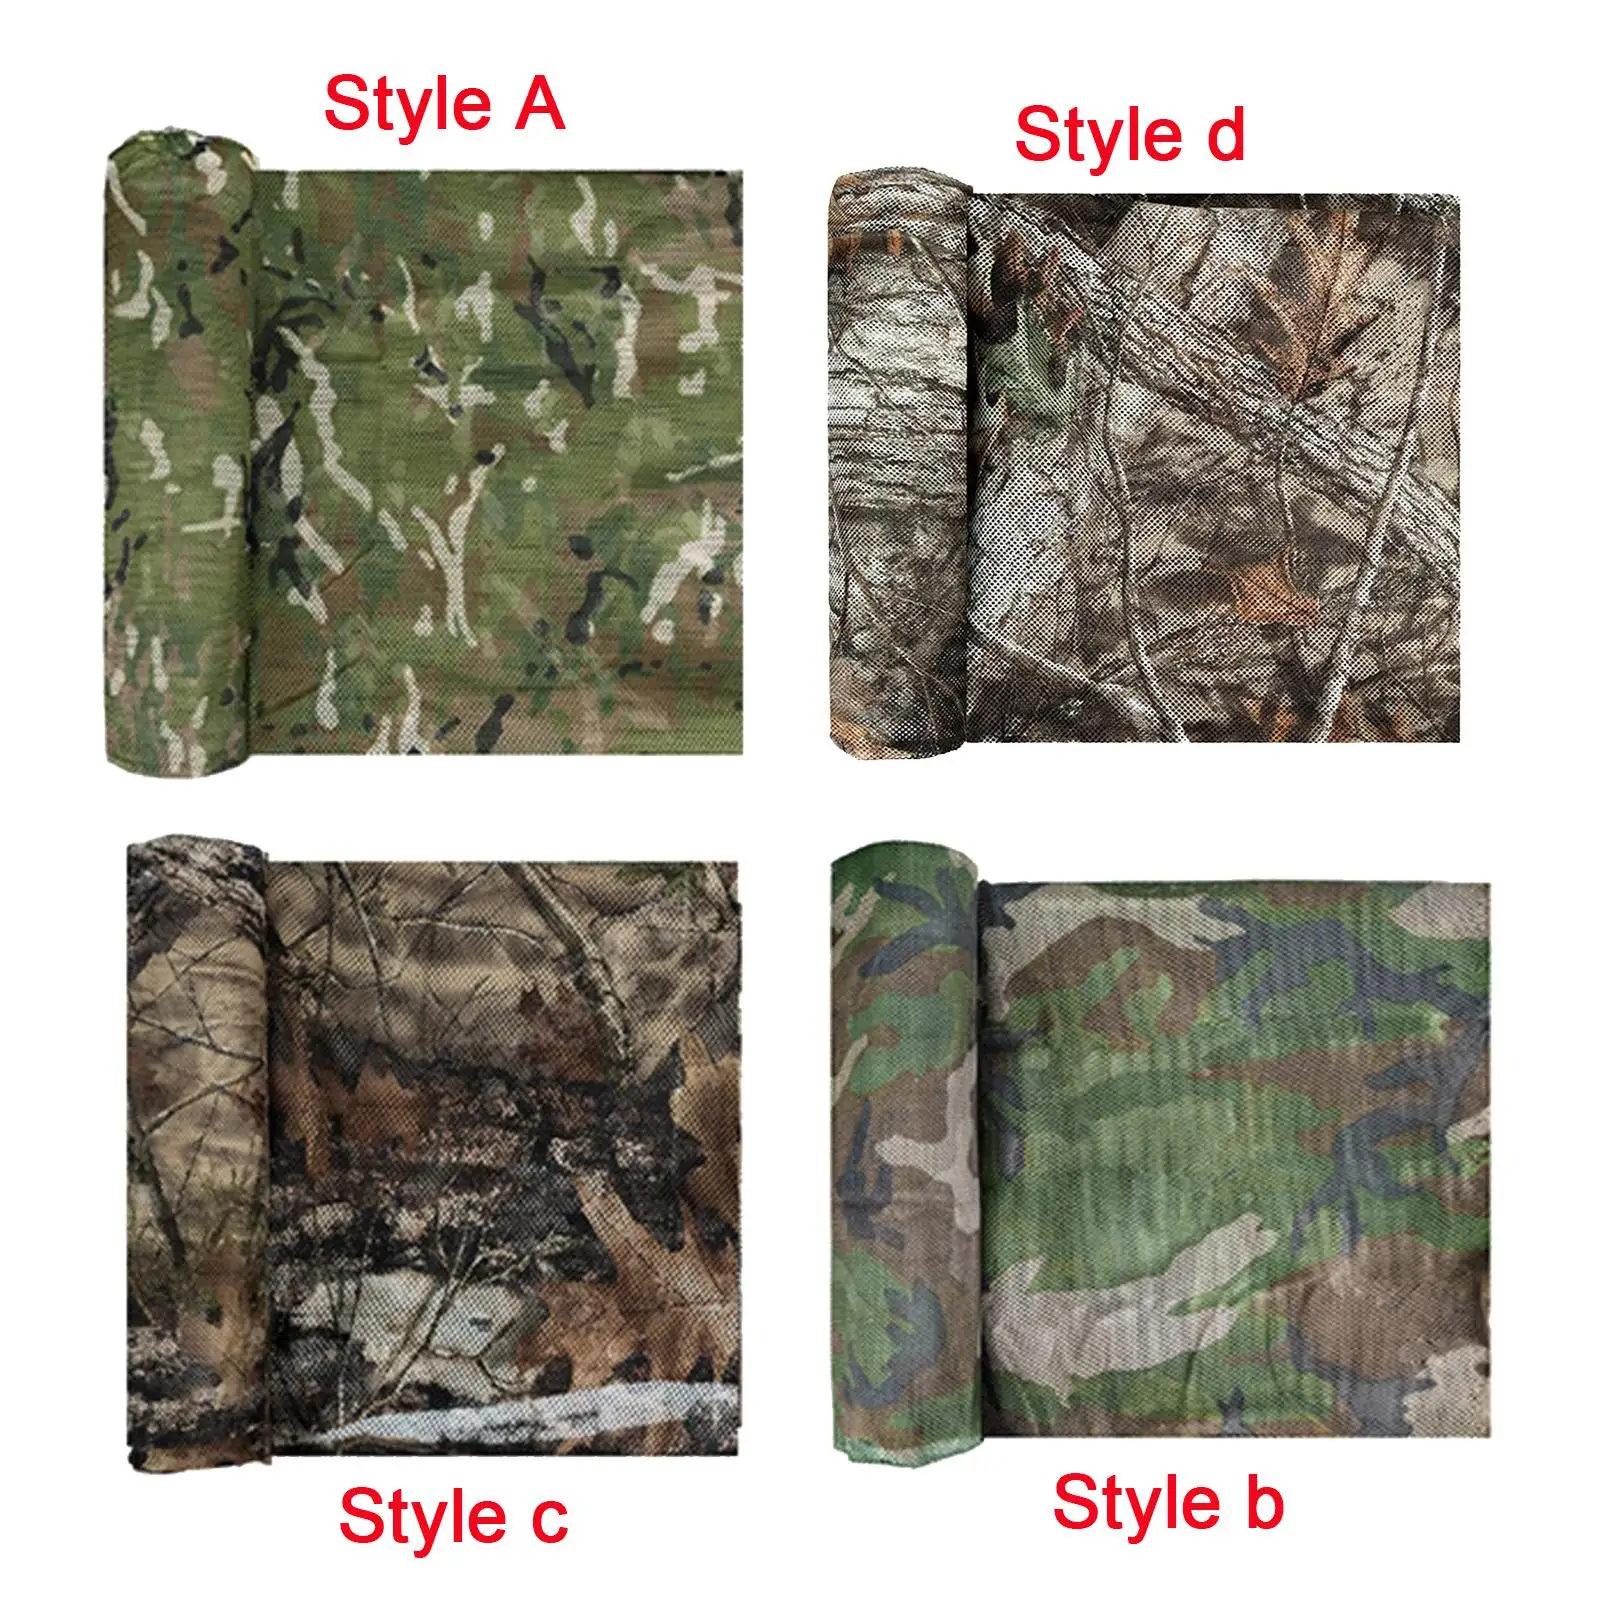 Camo Net Cover 300D Fabric 1.5MX4M Large Camo Mesh for Outdoor Party Decoration Front Yard Hunting Accessory